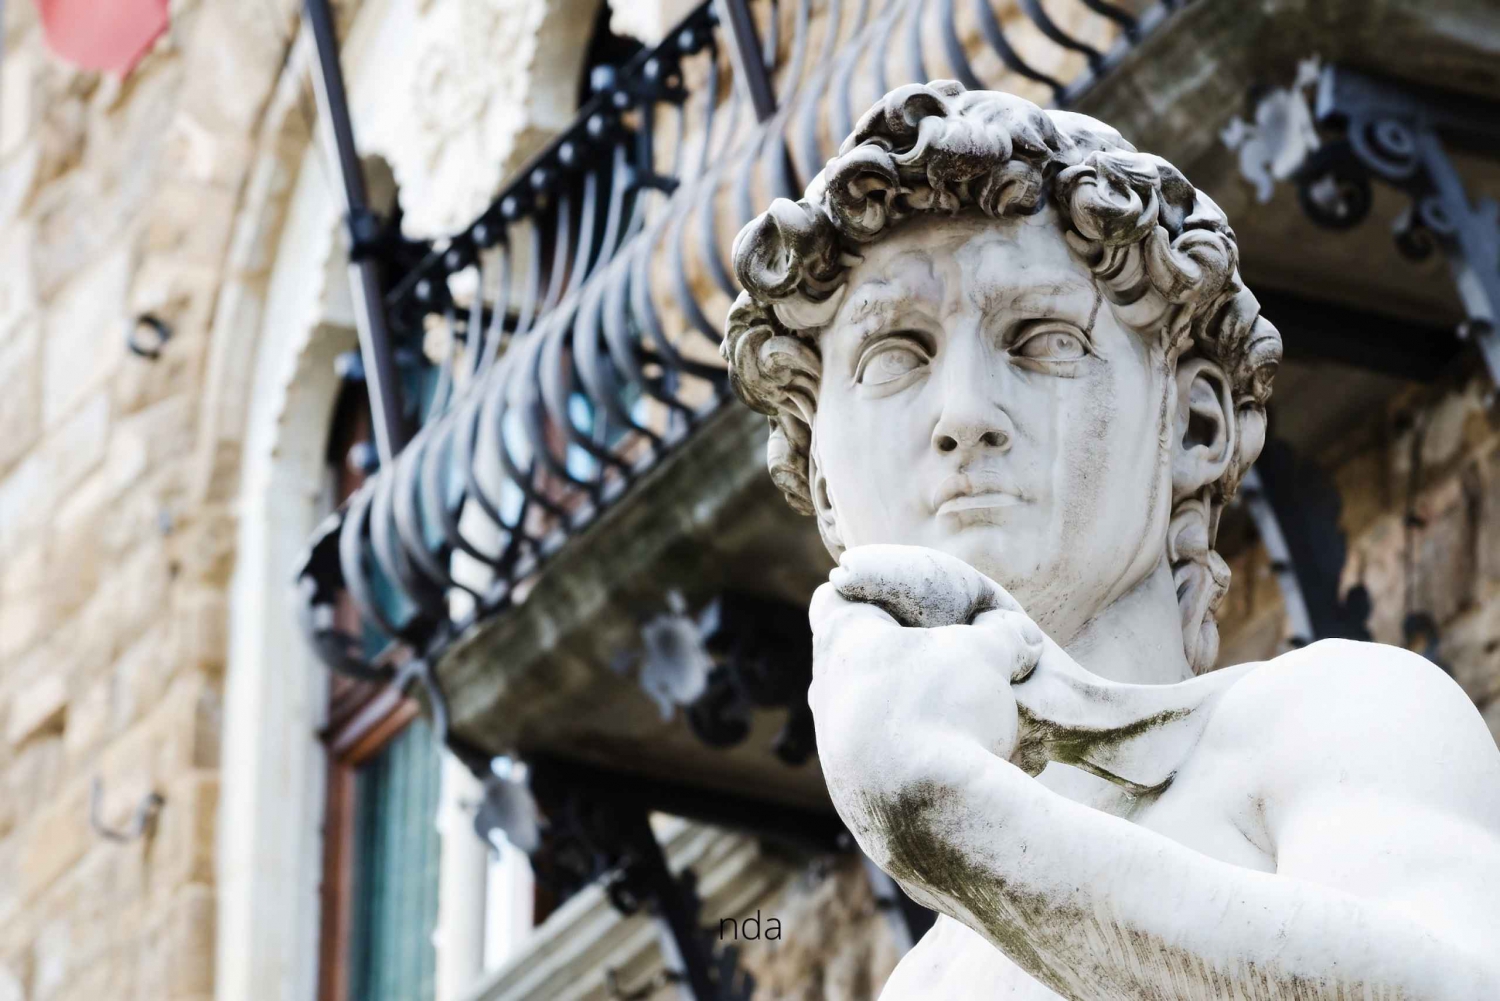 Florence: Highlights Self-Guided Scavenger Hunt & City Tour